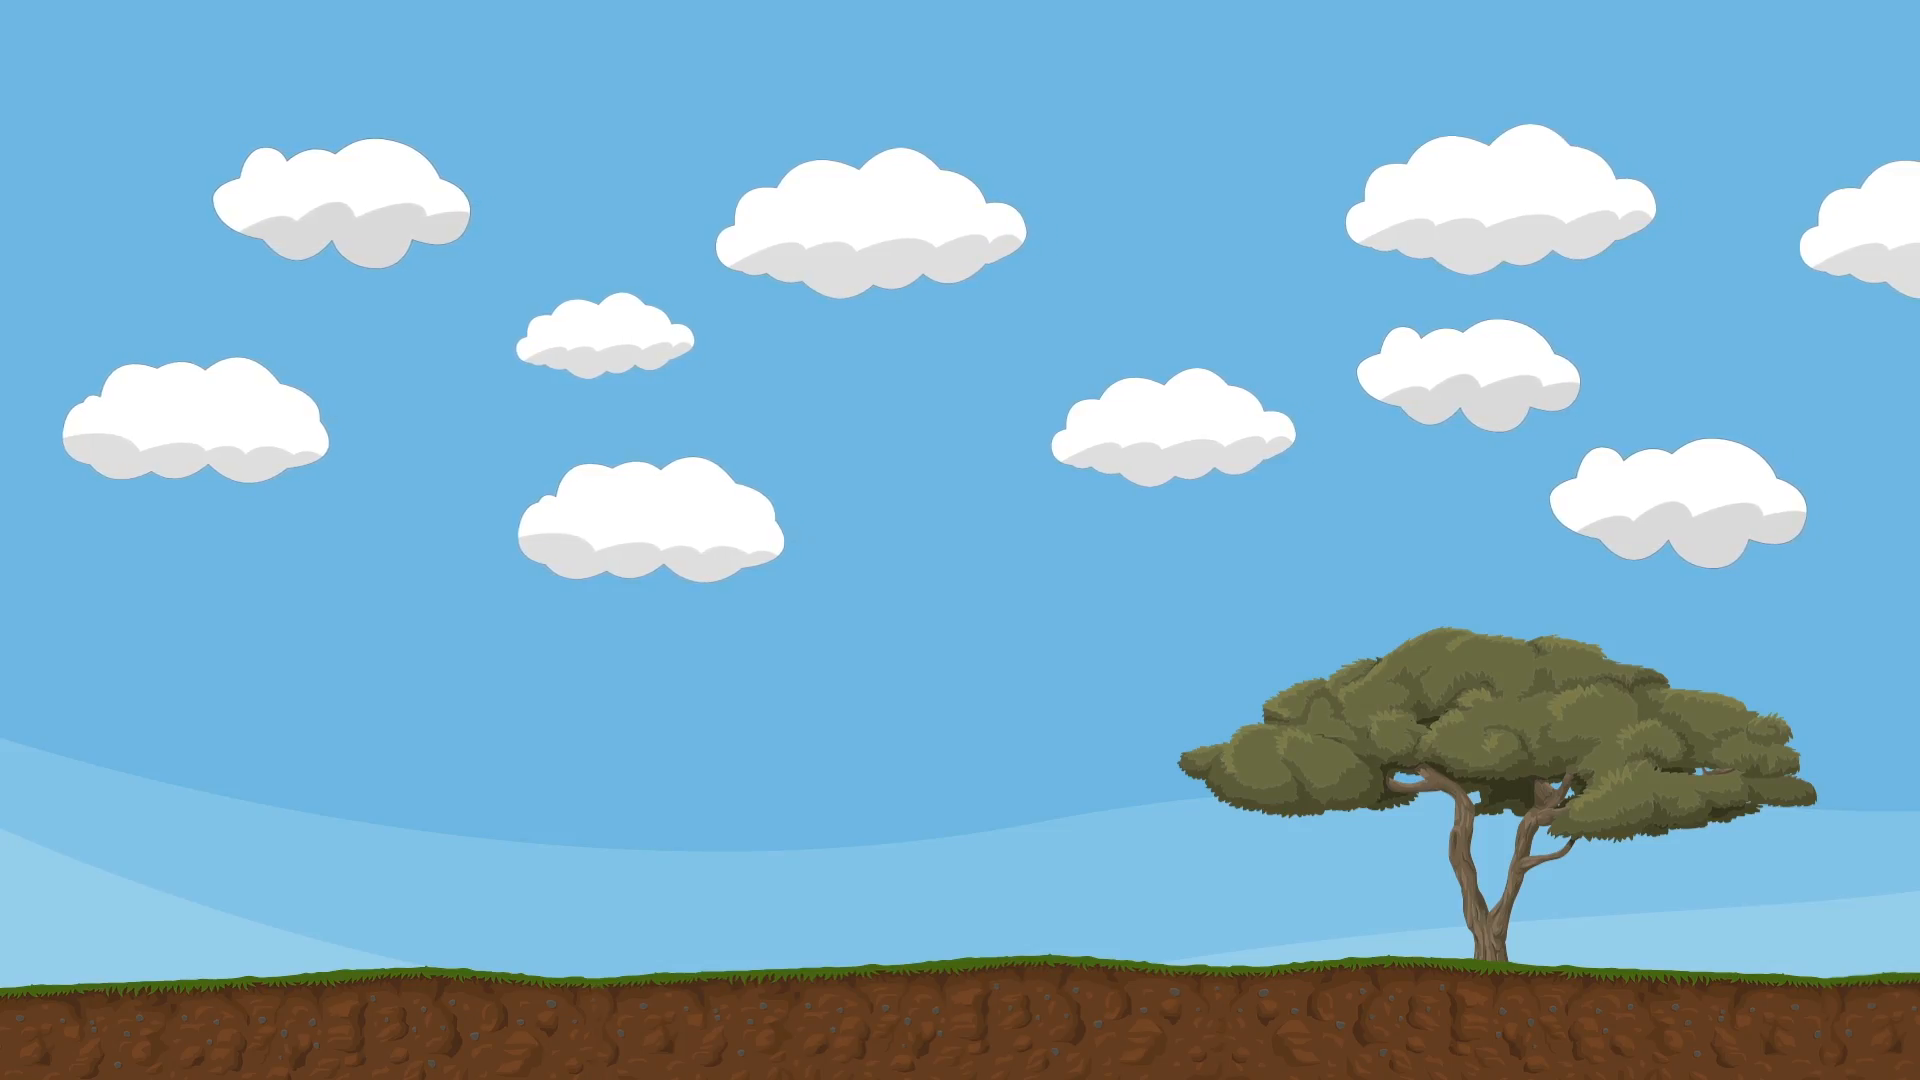 Animated Cartoon Cloudy Sky and Ground Motion Background - Videoblocks